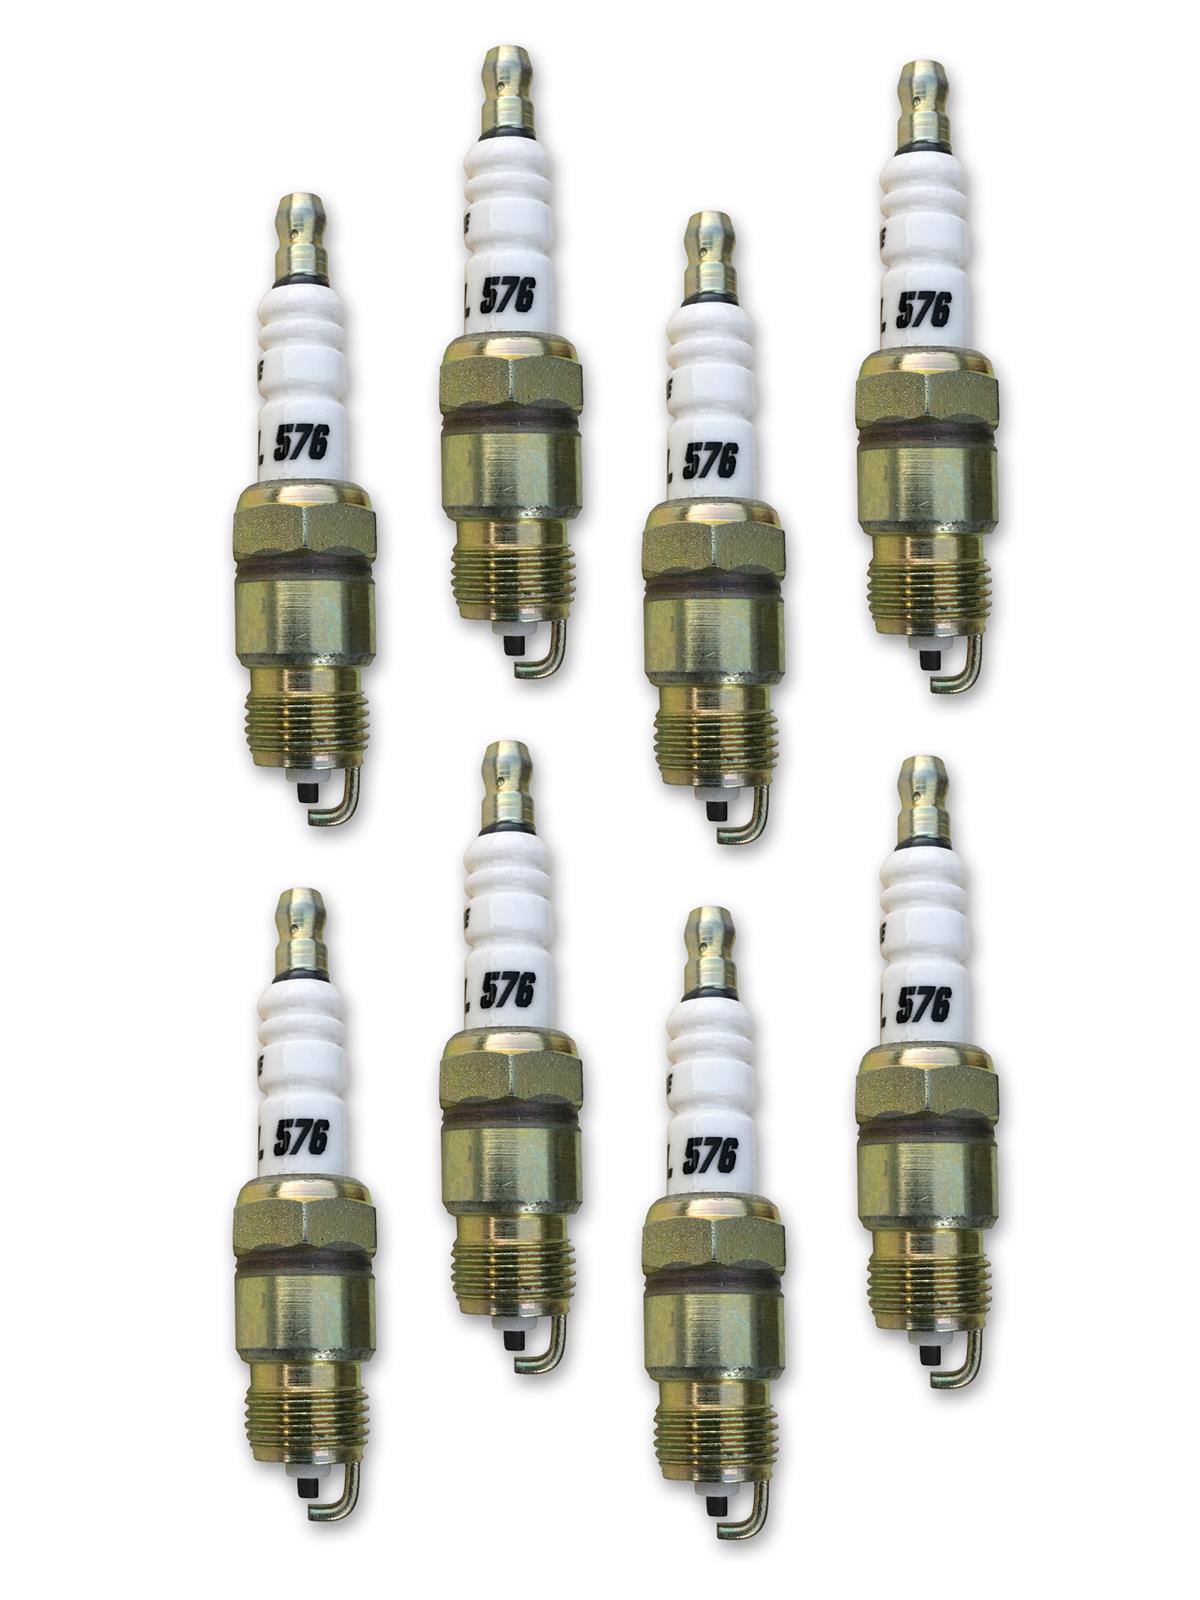 Pack of 4 ACCEL 0576-4 Copper Core Spark Plug,